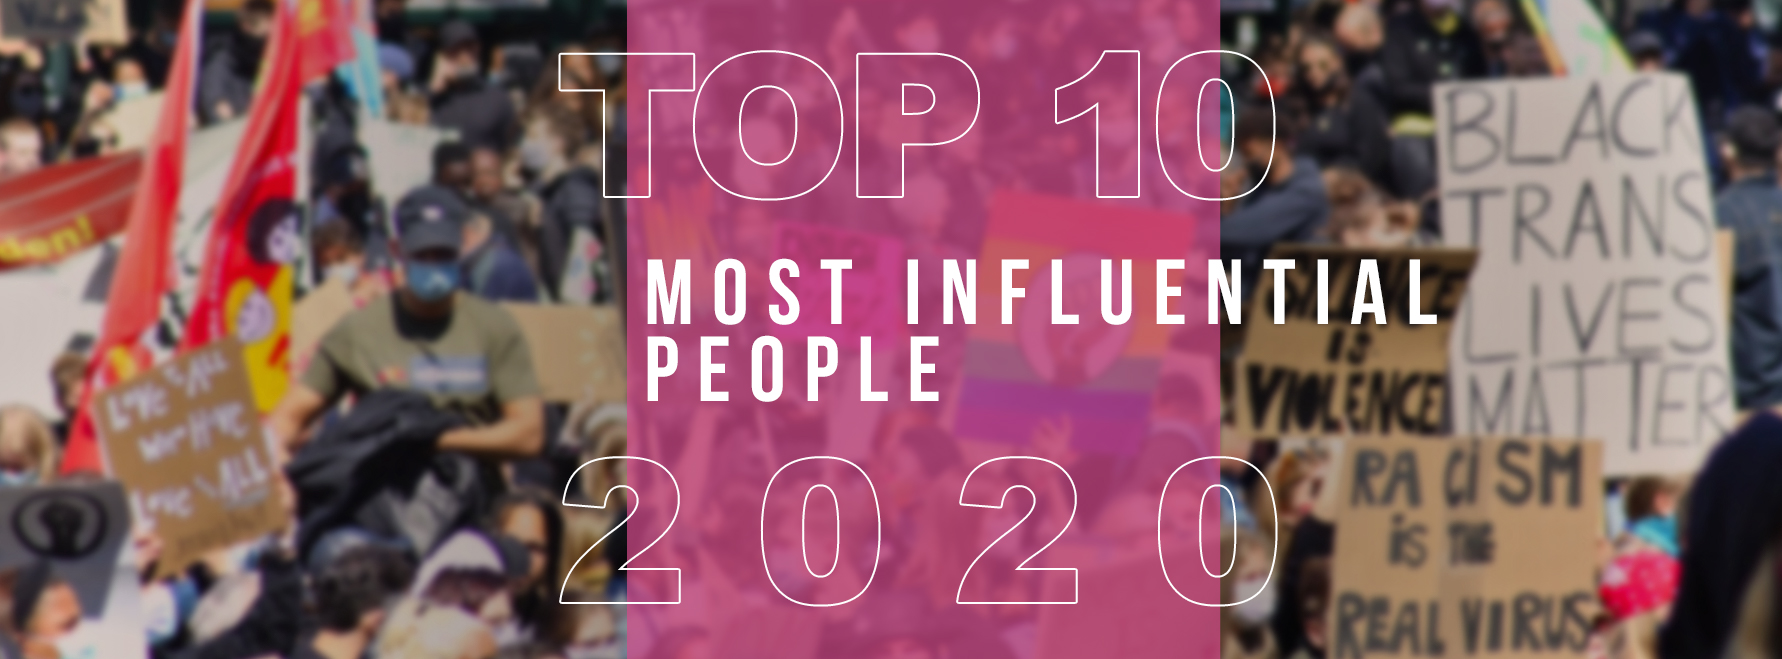 Top 10 most influential people of 2020